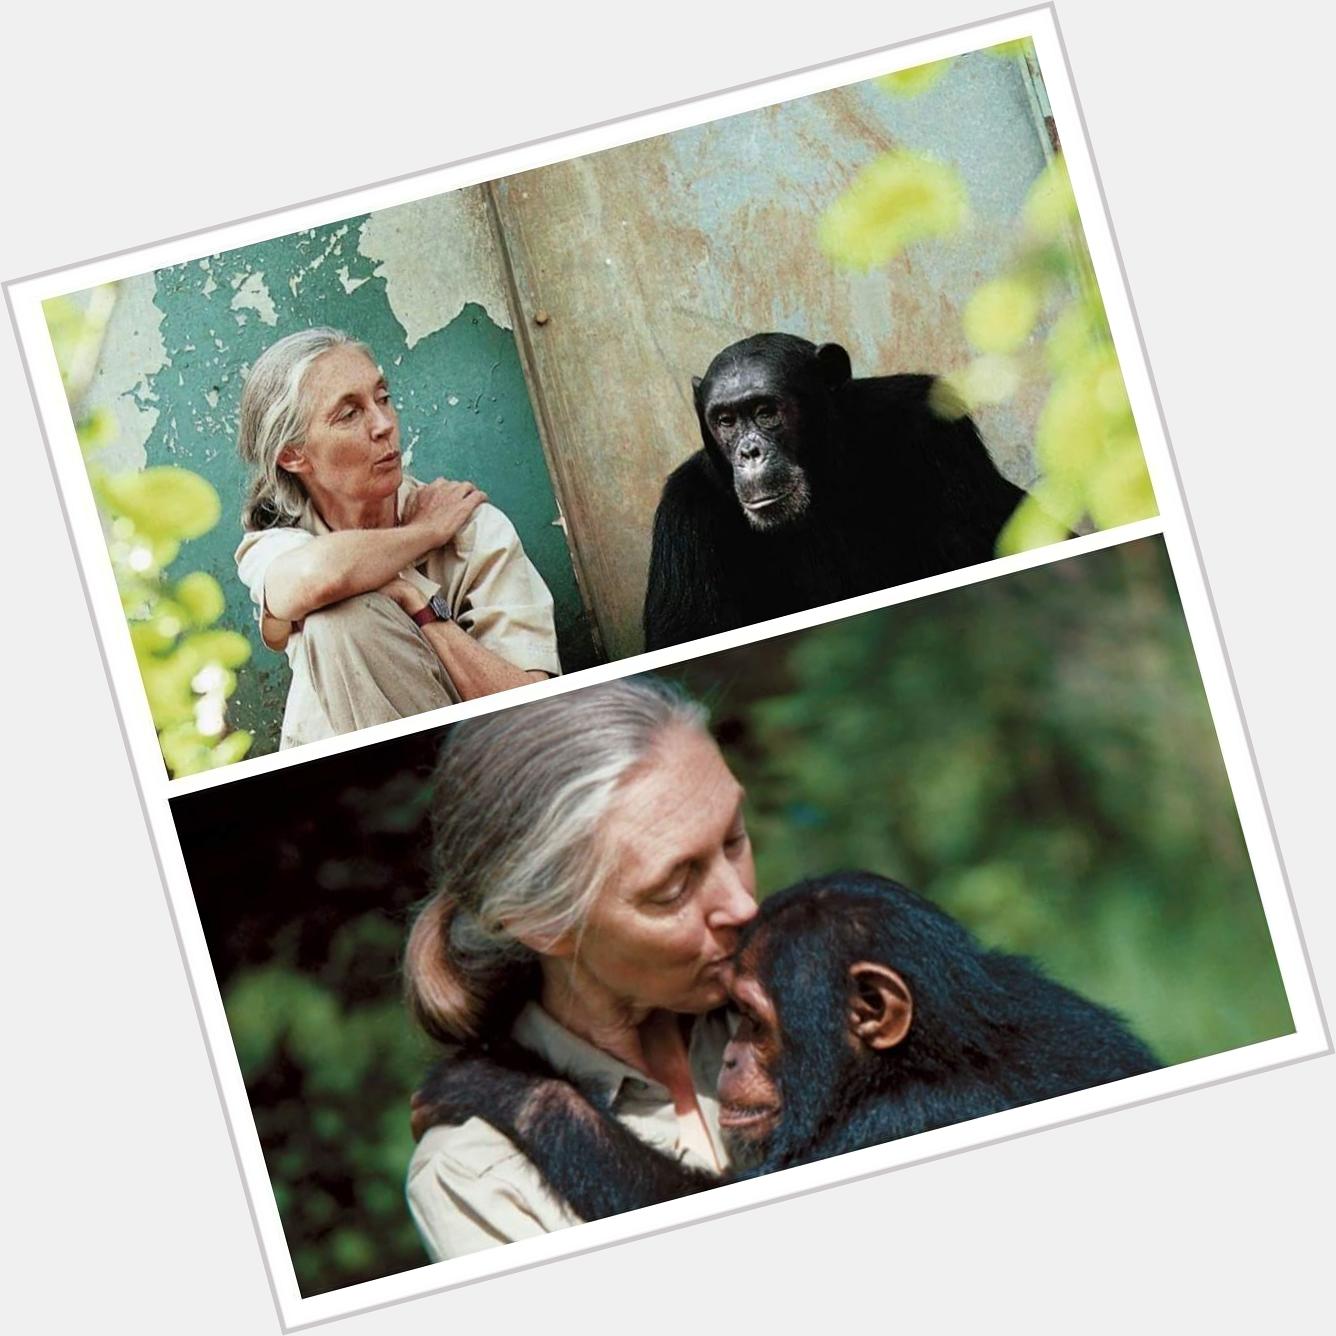 HAPPY BIRTHDAY TO JANE GOODALL......WOW A HERO.....A BEAUTIFUL HEAAND A SPECIAL WOMAN....THANK YOU  